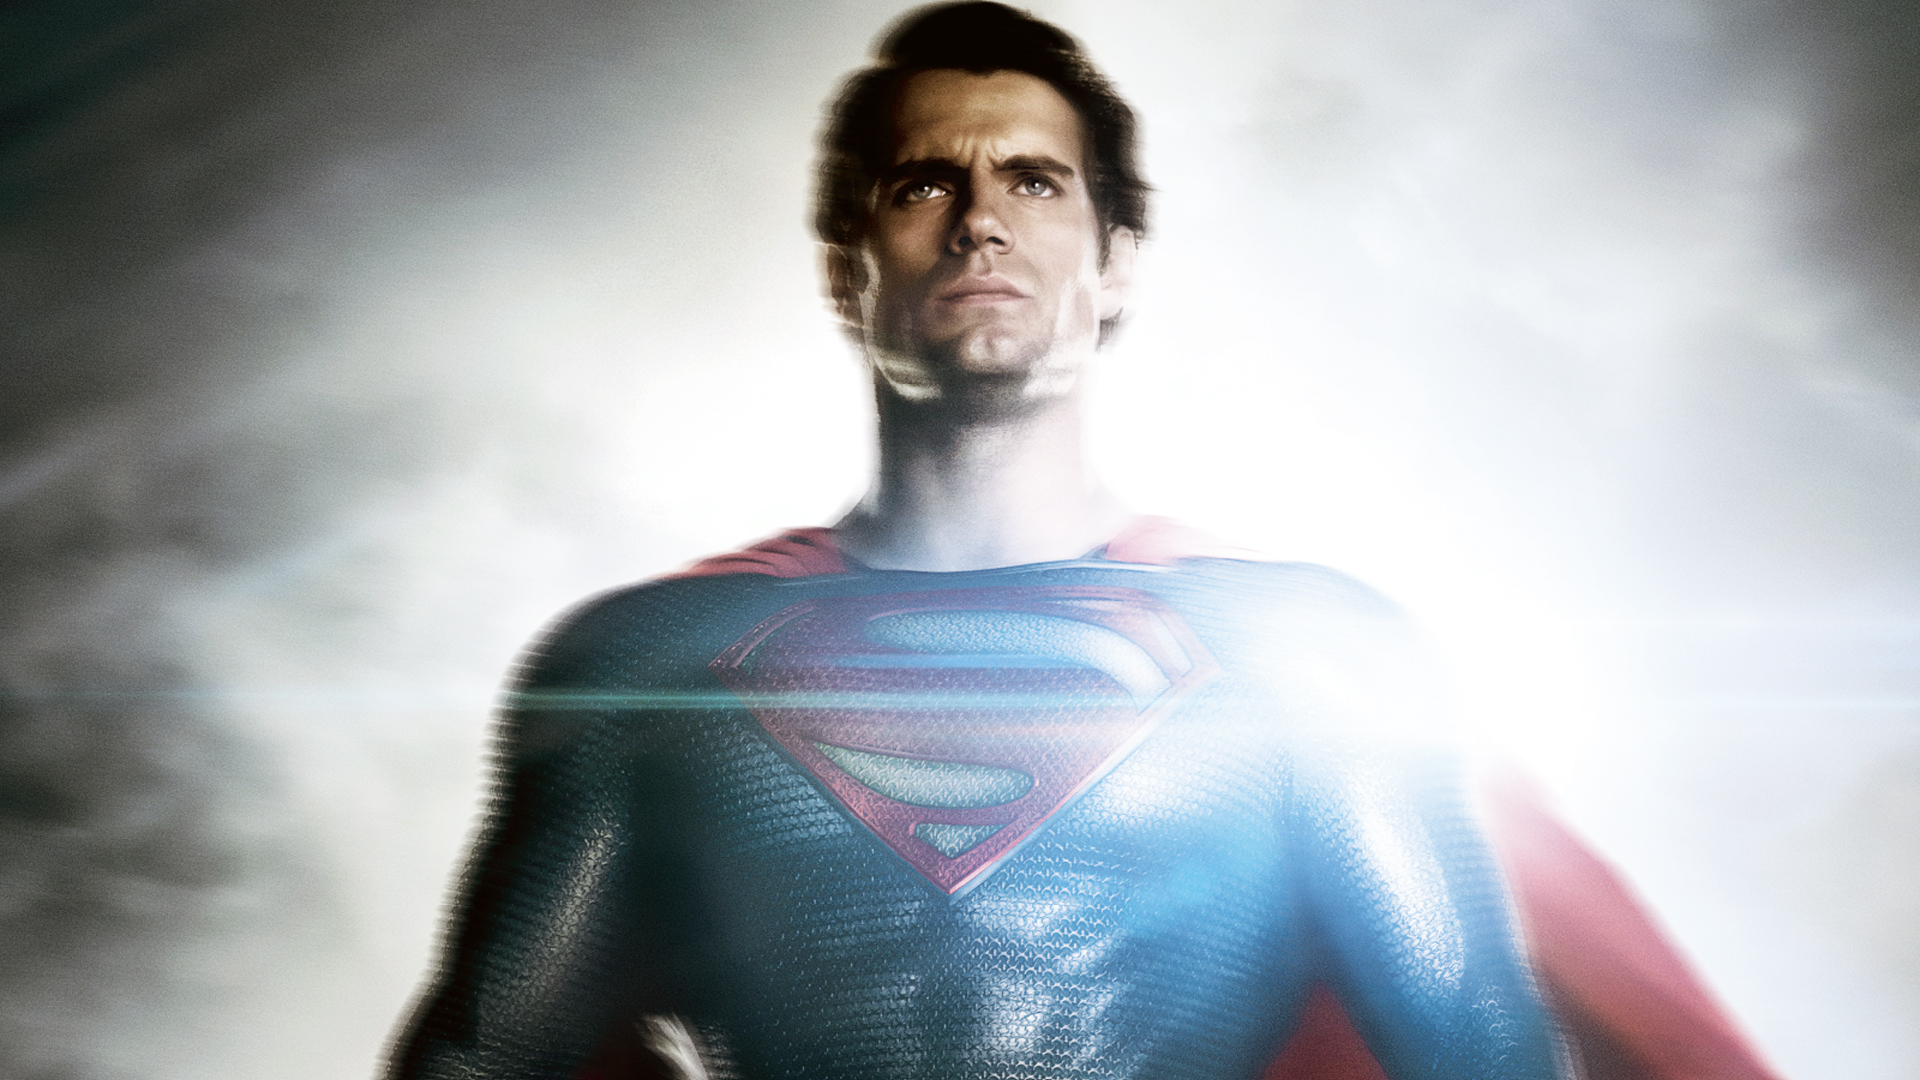 Man of Steel 2 Back On With Henry Cavill's Superman After Years of